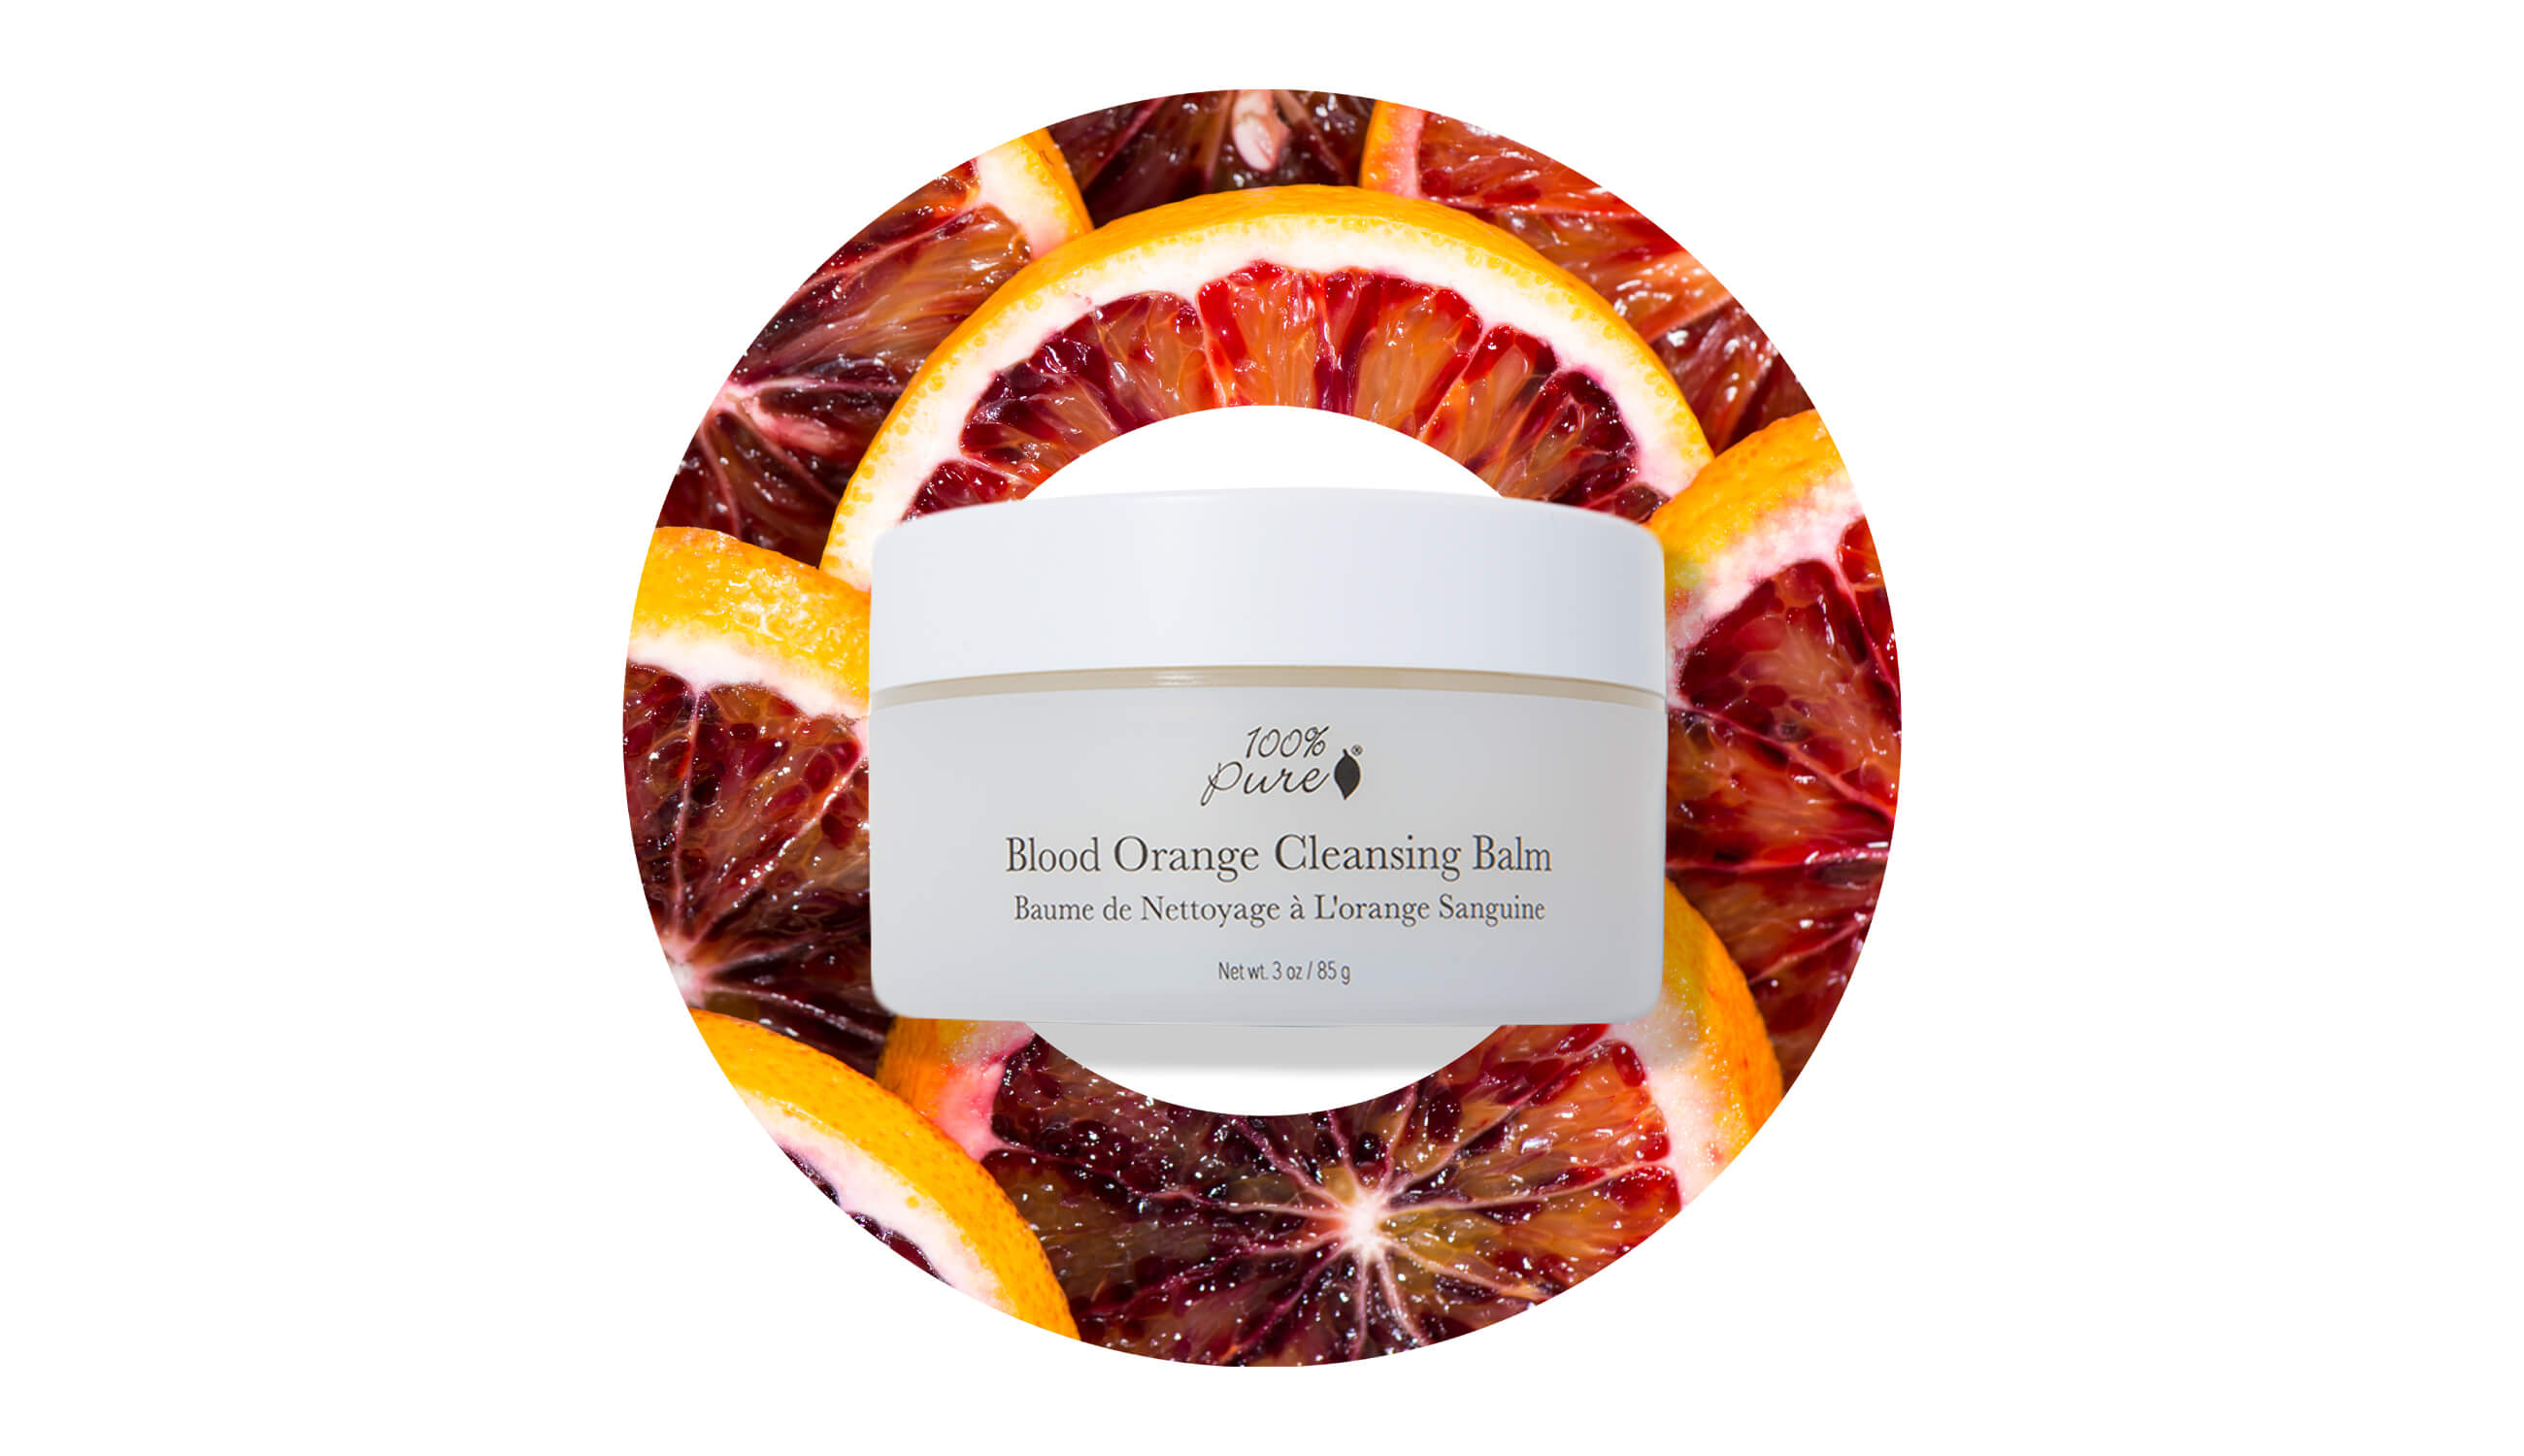 Blood Orange Cleansing Balm packed with antioxidants for skin health